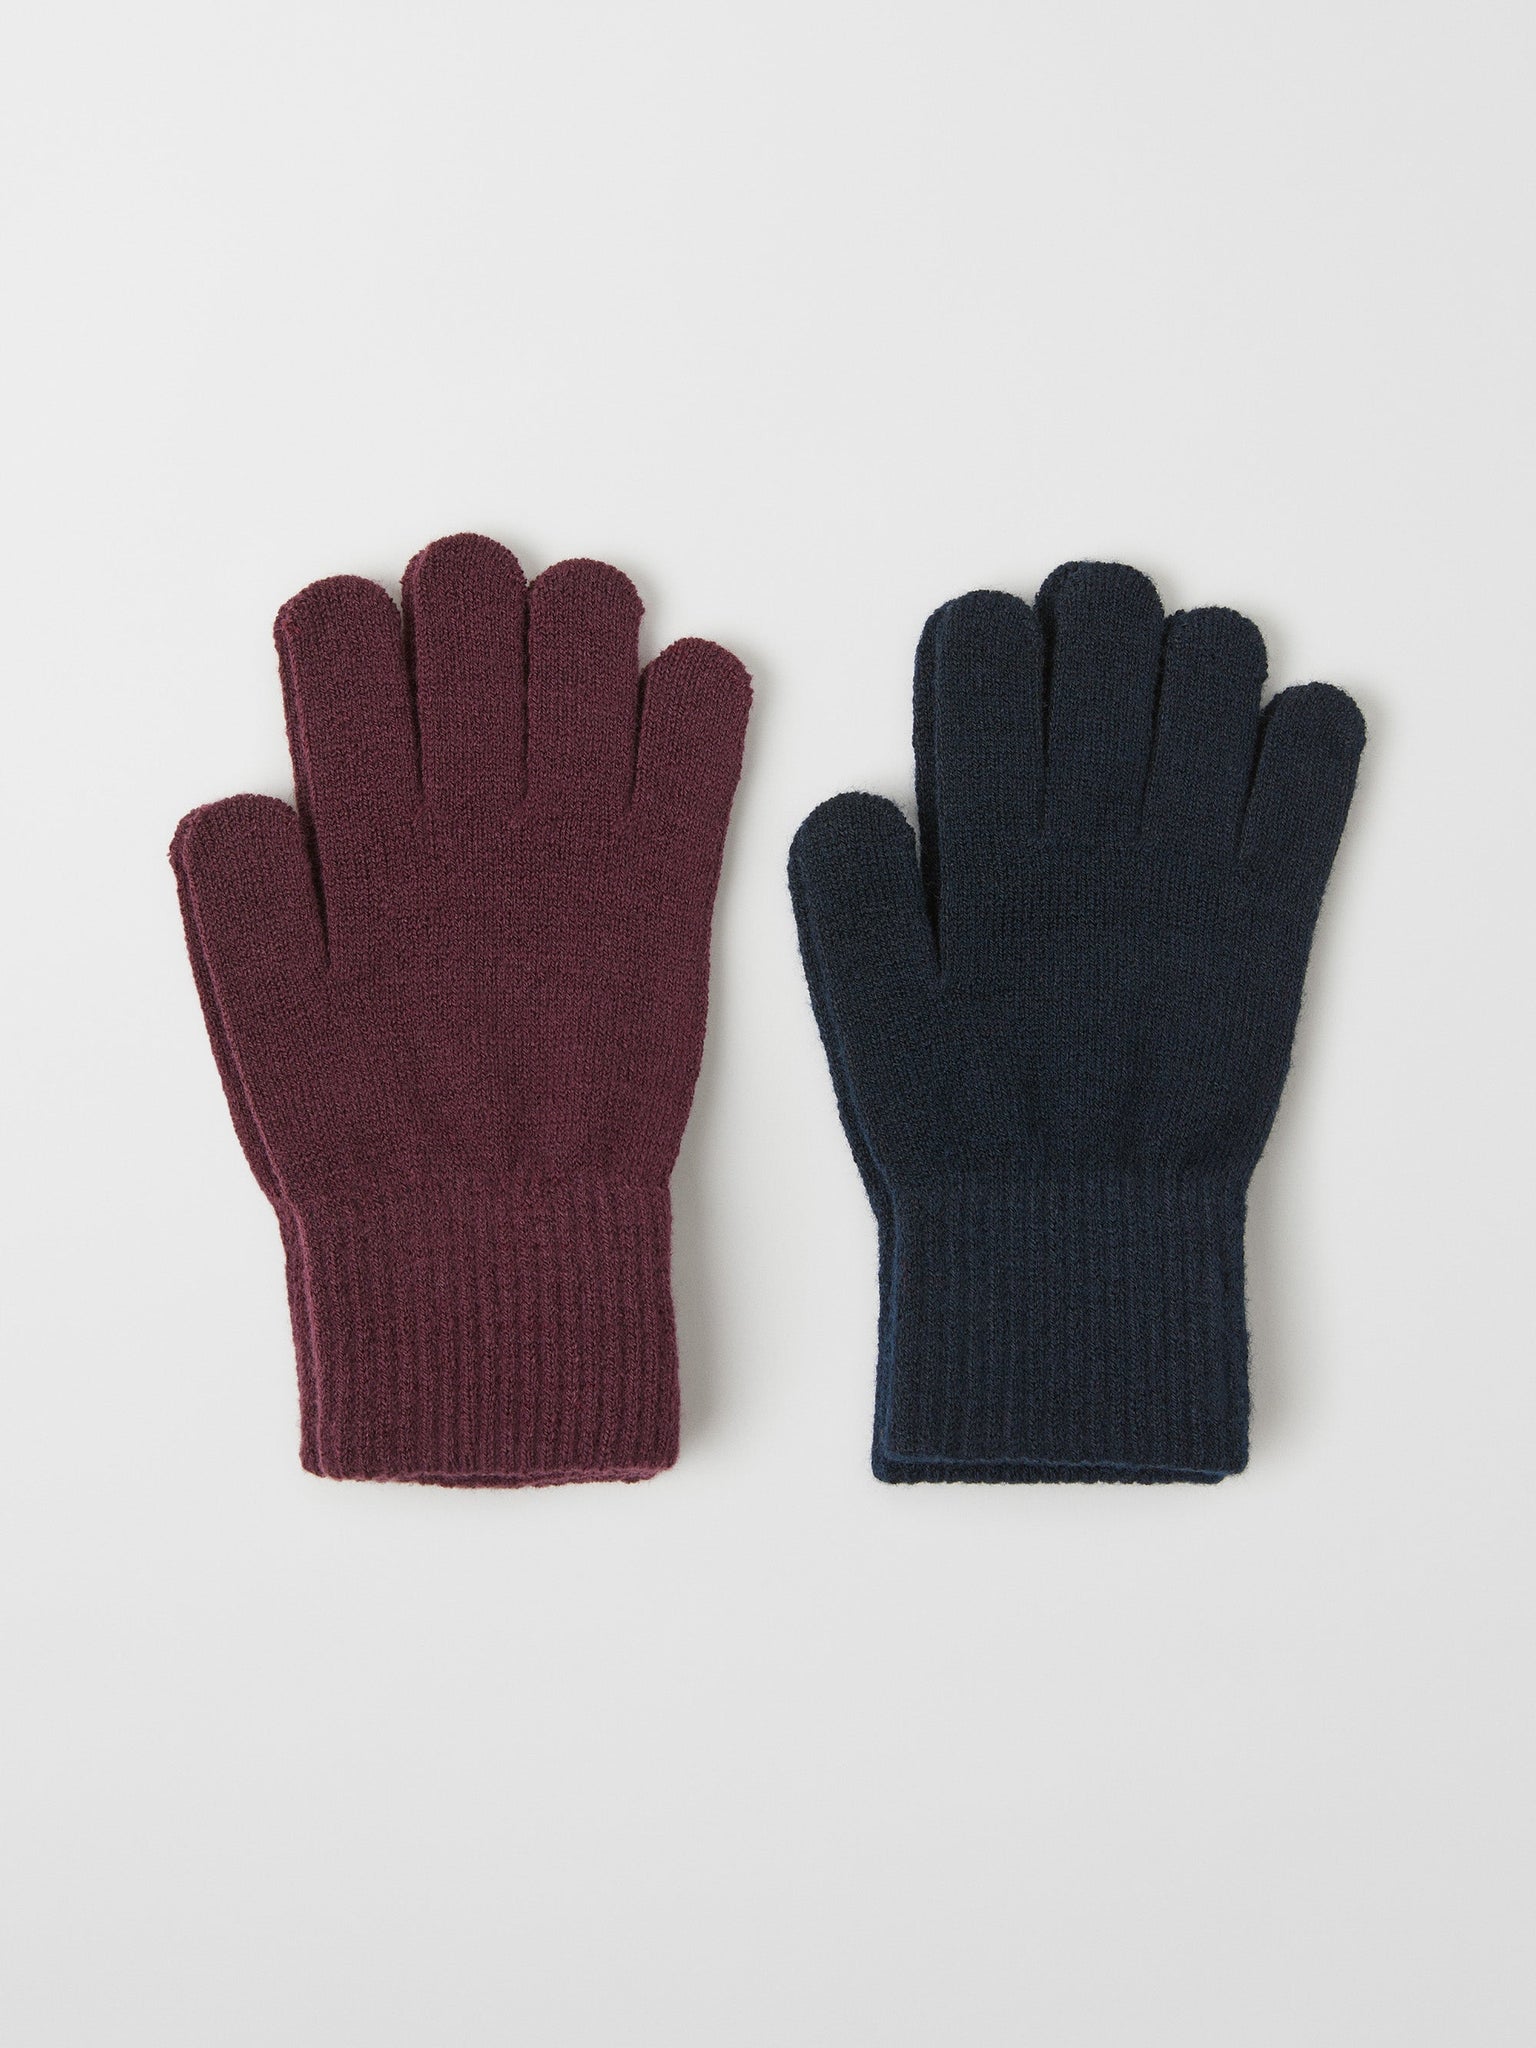 Burgundy Kids Magic Gloves Multipack from the Polarn O. Pyret outerwear collection. Ethically produced kids outerwear.